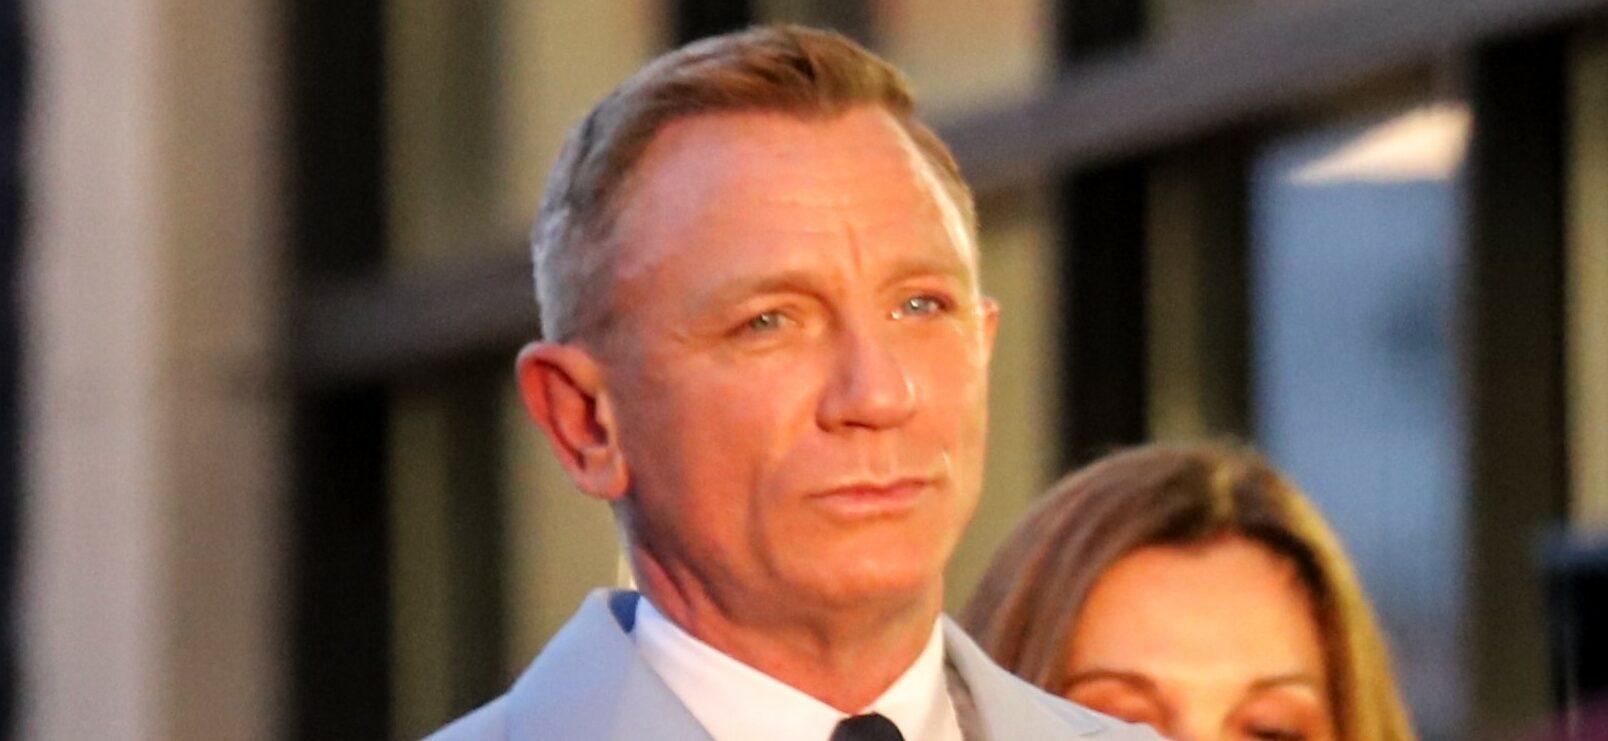 Daniel Craig receives his star in Wall of Fame